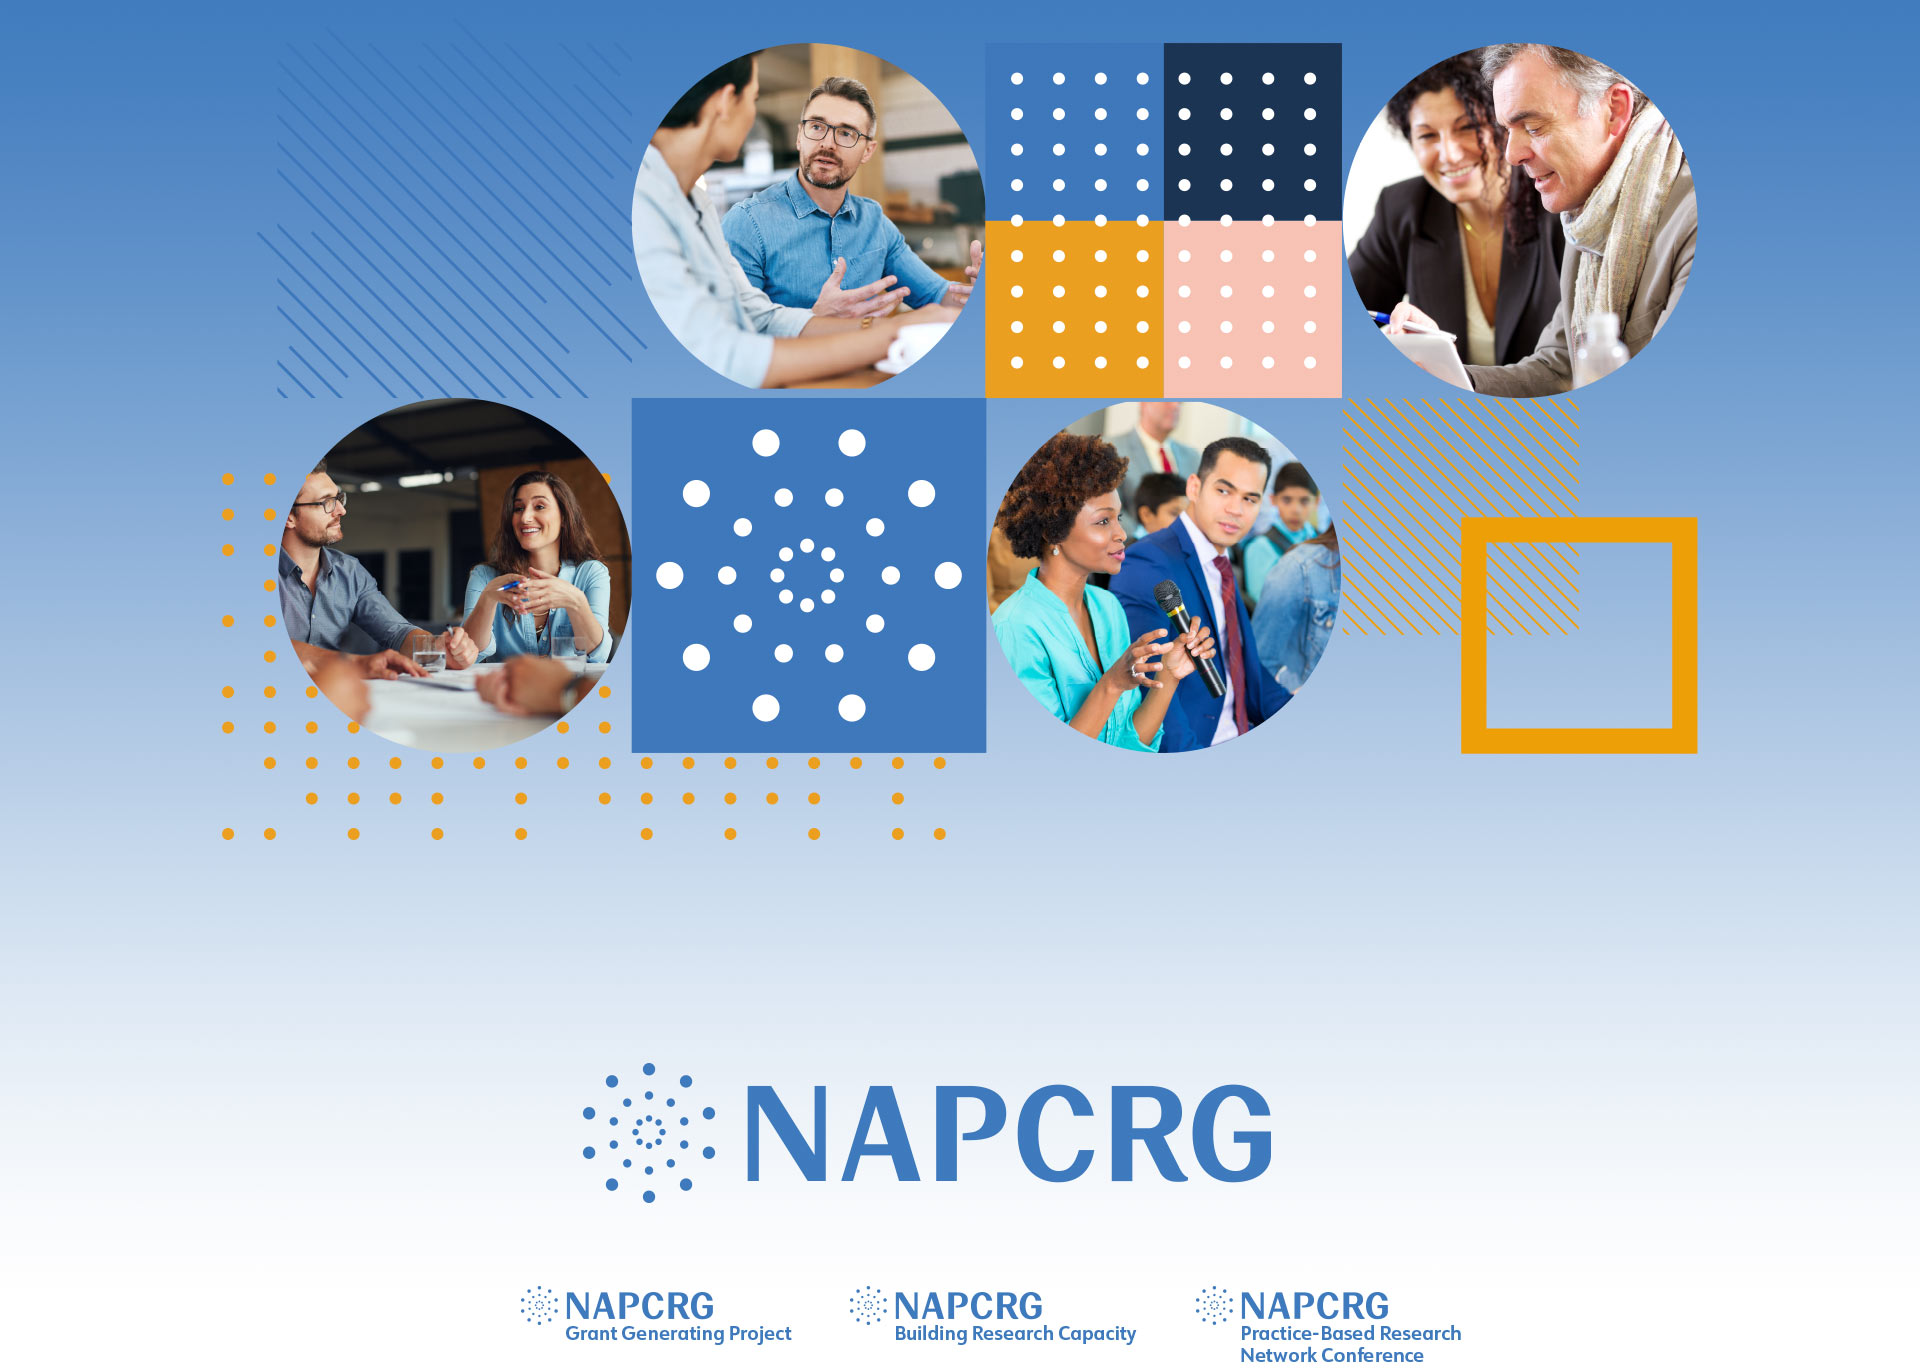 Visual branding design system for NAPCRG with logo mark, brand colors and pattern